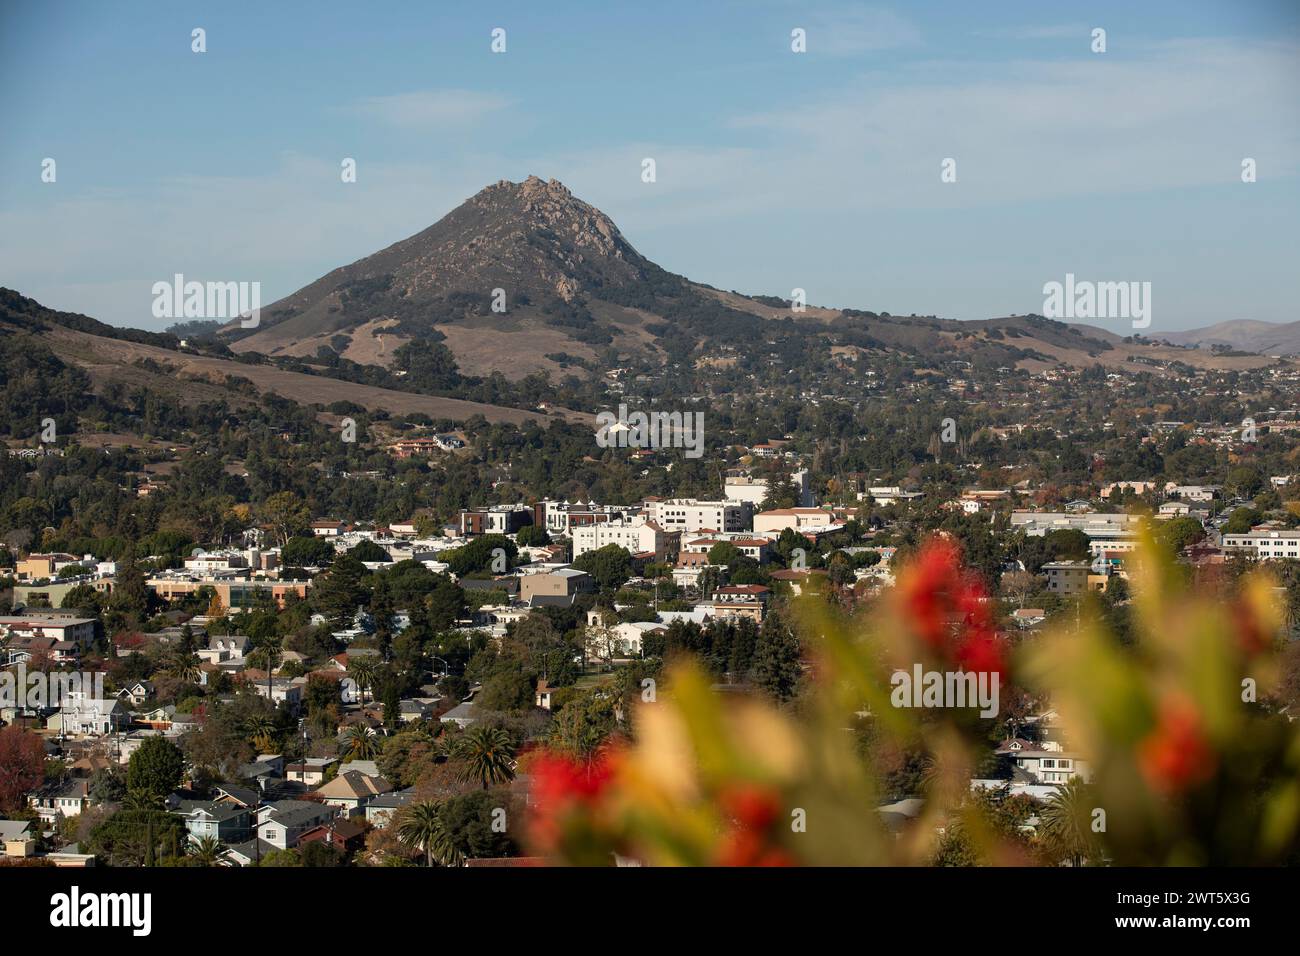 San Luis Obispo, California, USA - December 3, 2021: Aerial view of afternoon light shining on the historic buildings of the downtown core. Stock Photo